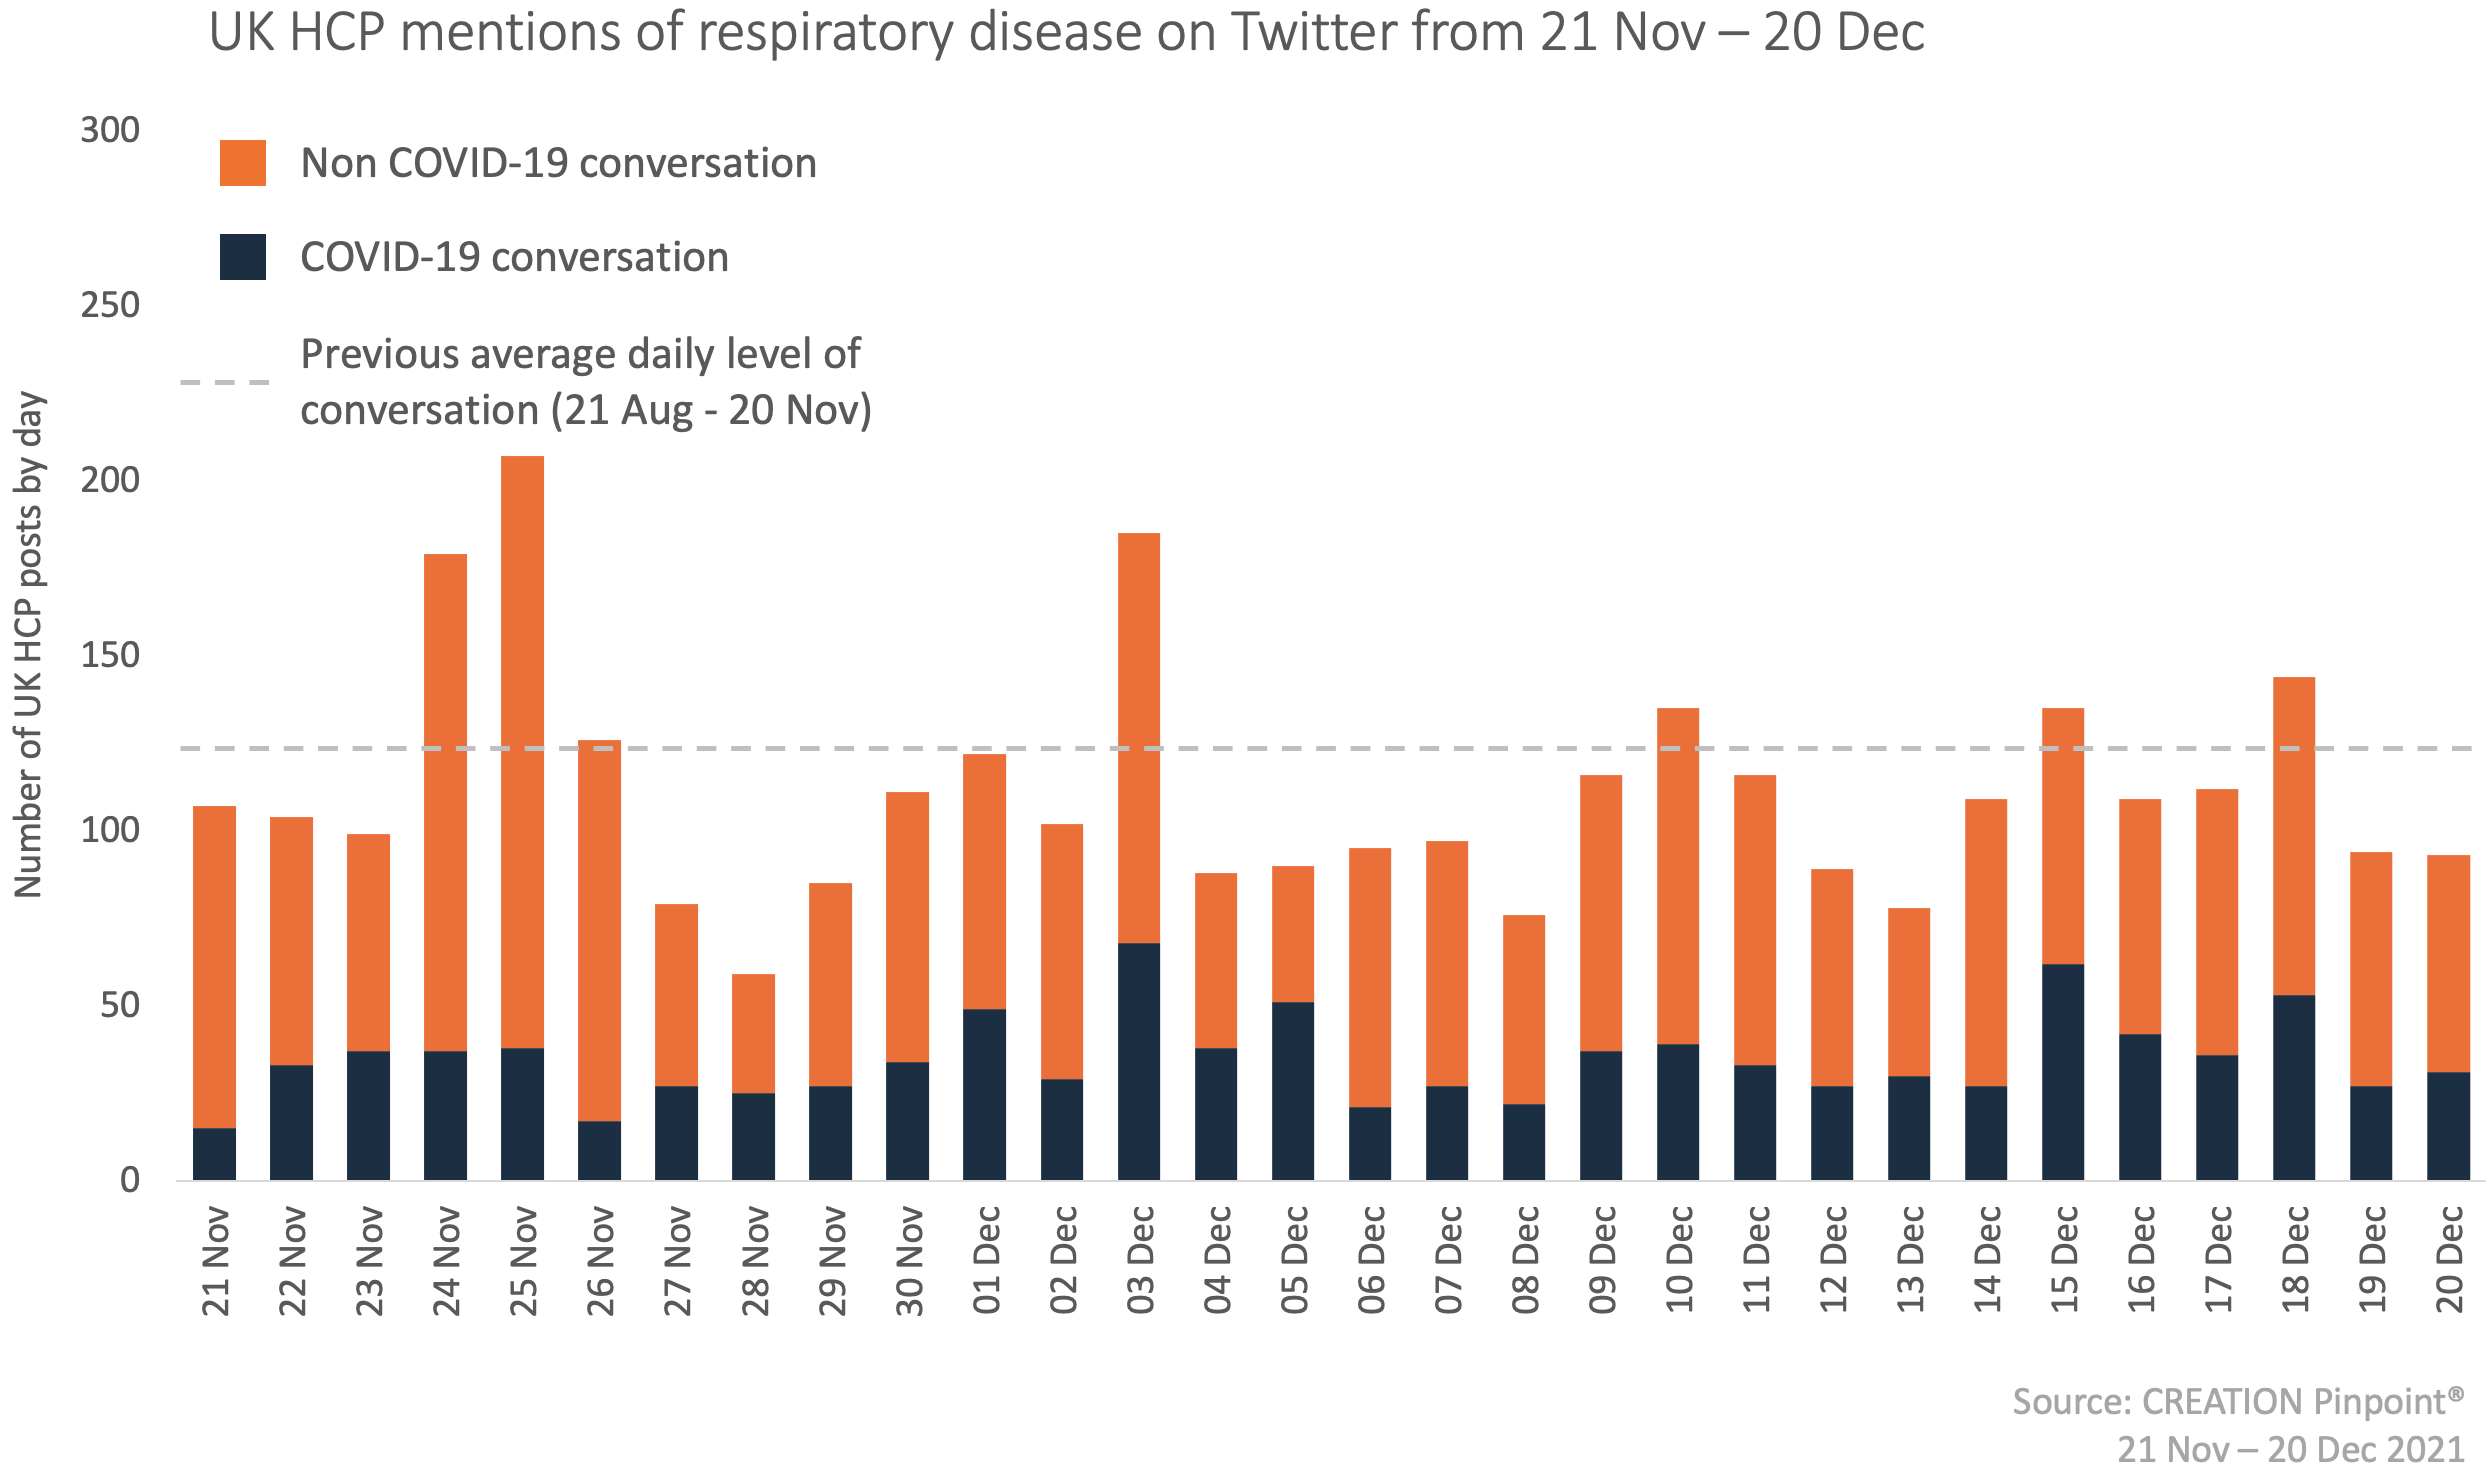 An image of a graph showing UK HCP mentions of respiratory disease on Twitter 